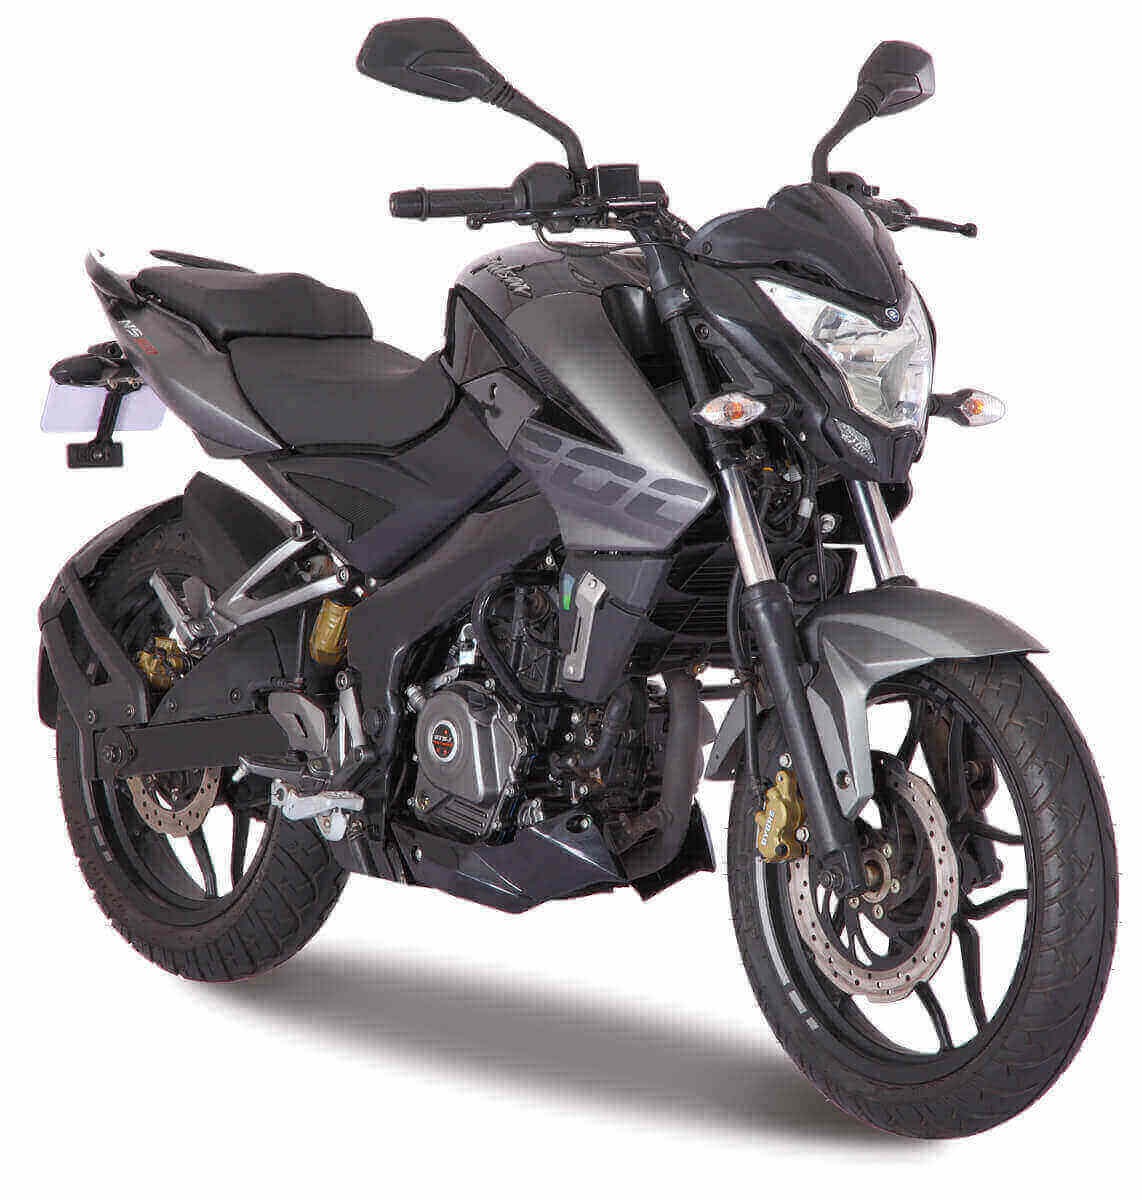 Rtr Apache 200 Price In Nepal